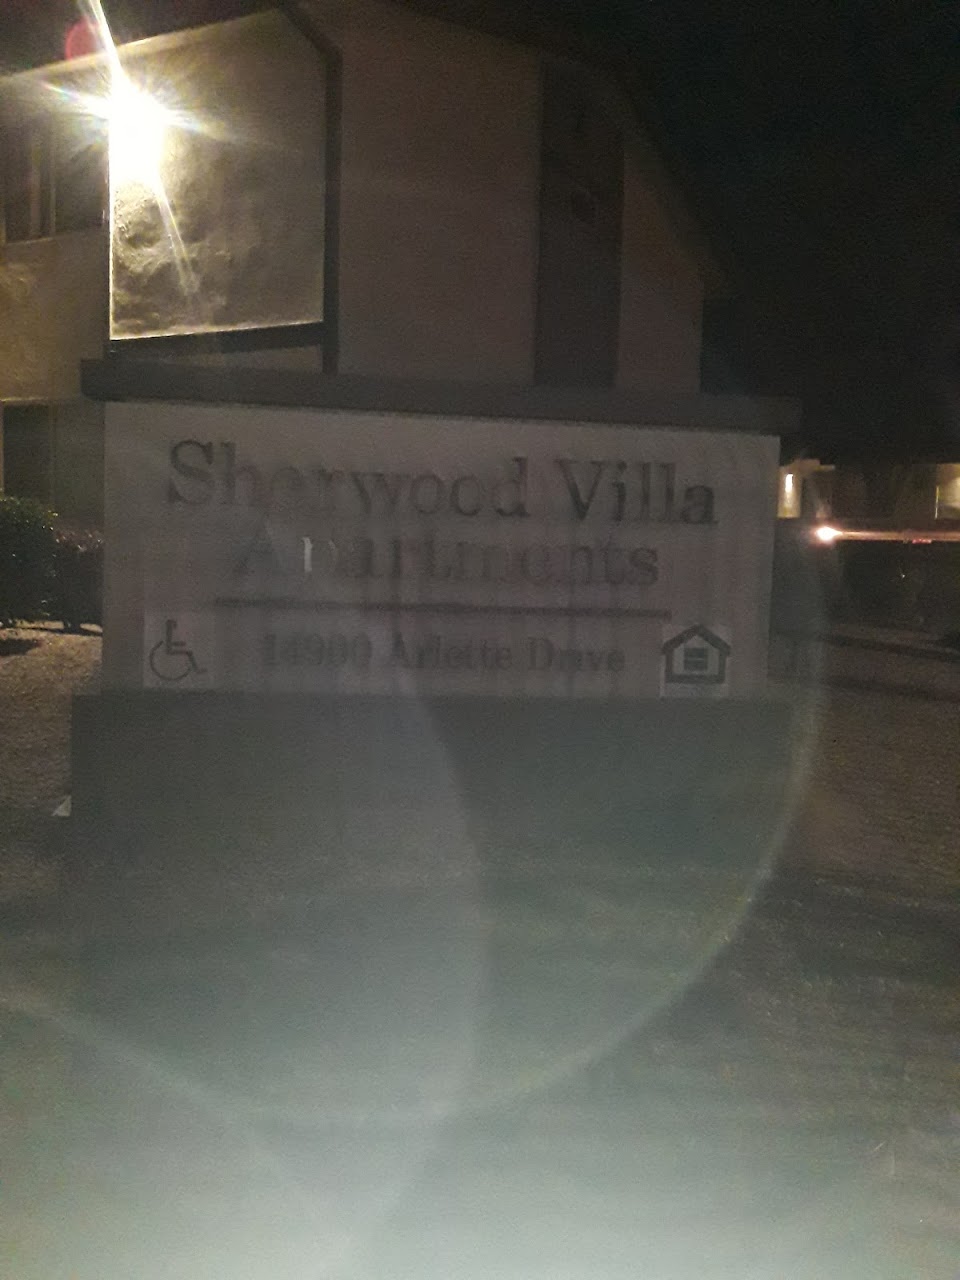 Photo of SHERWOOD VILLA. Affordable housing located at 14900 ARLETTE DRIVE VICTORVILLE, CA 92394